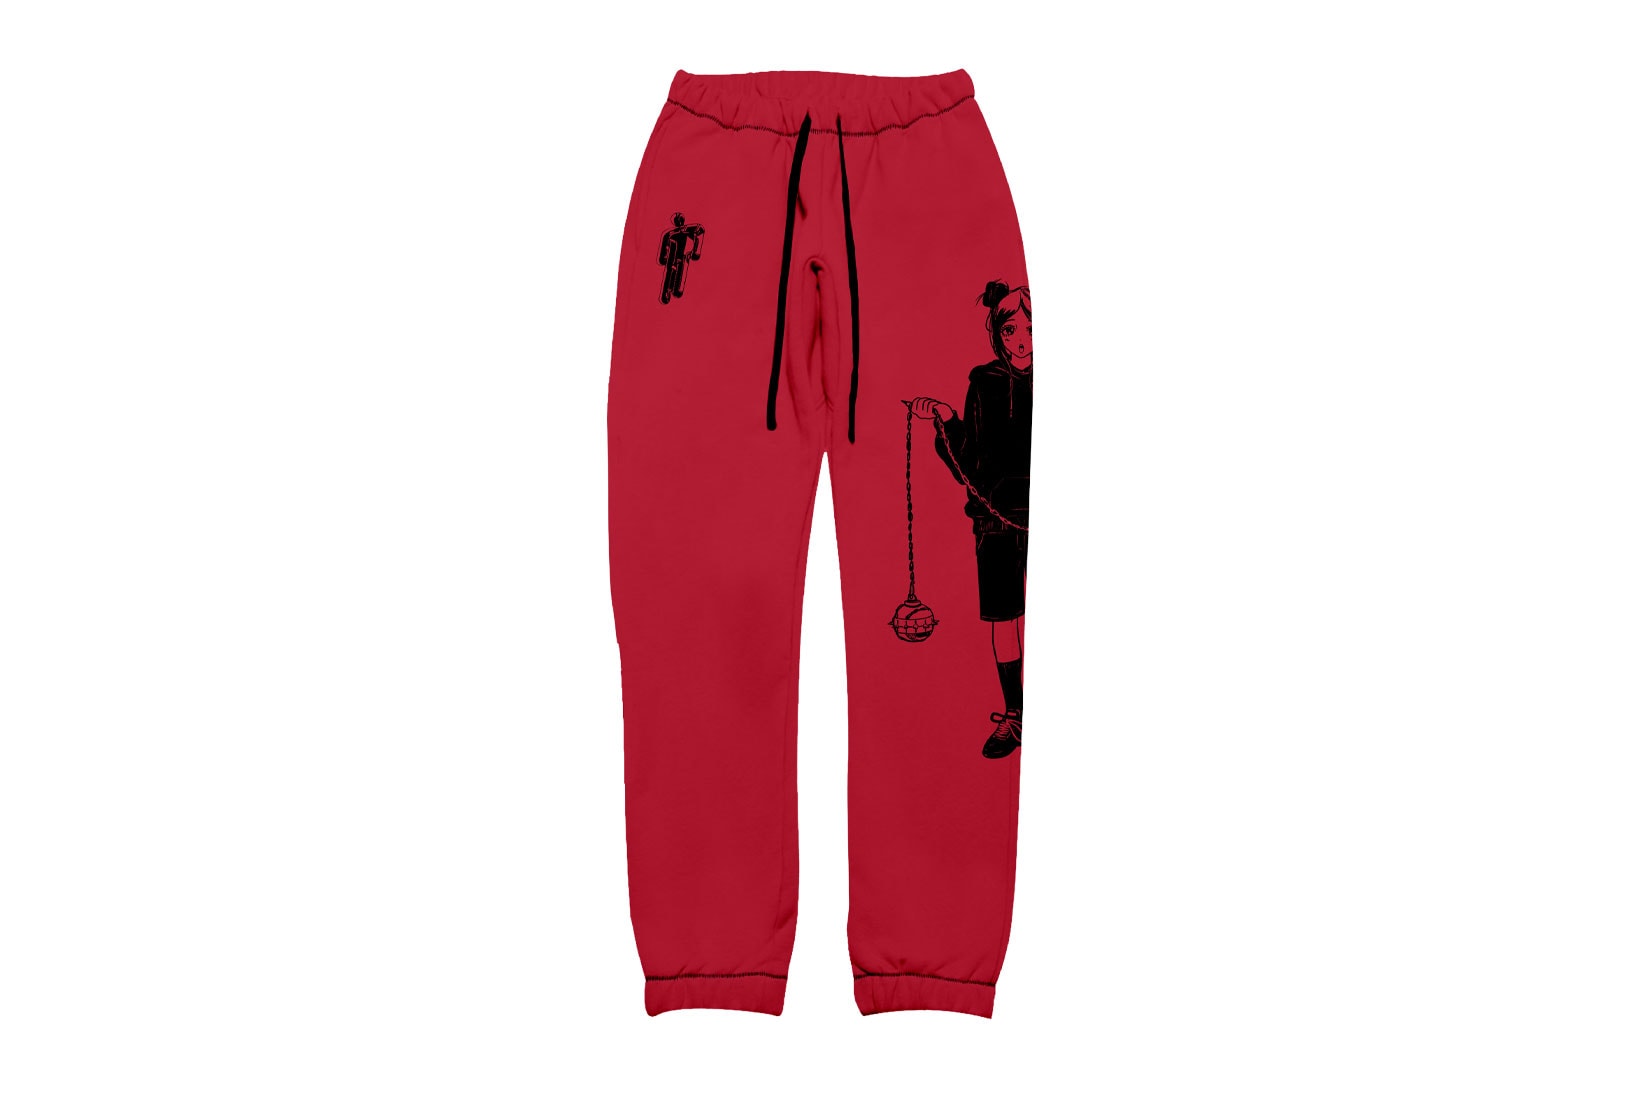 billie eilish blohsh merch the worlds a little blurry documentary collection hoodies red sweatpants